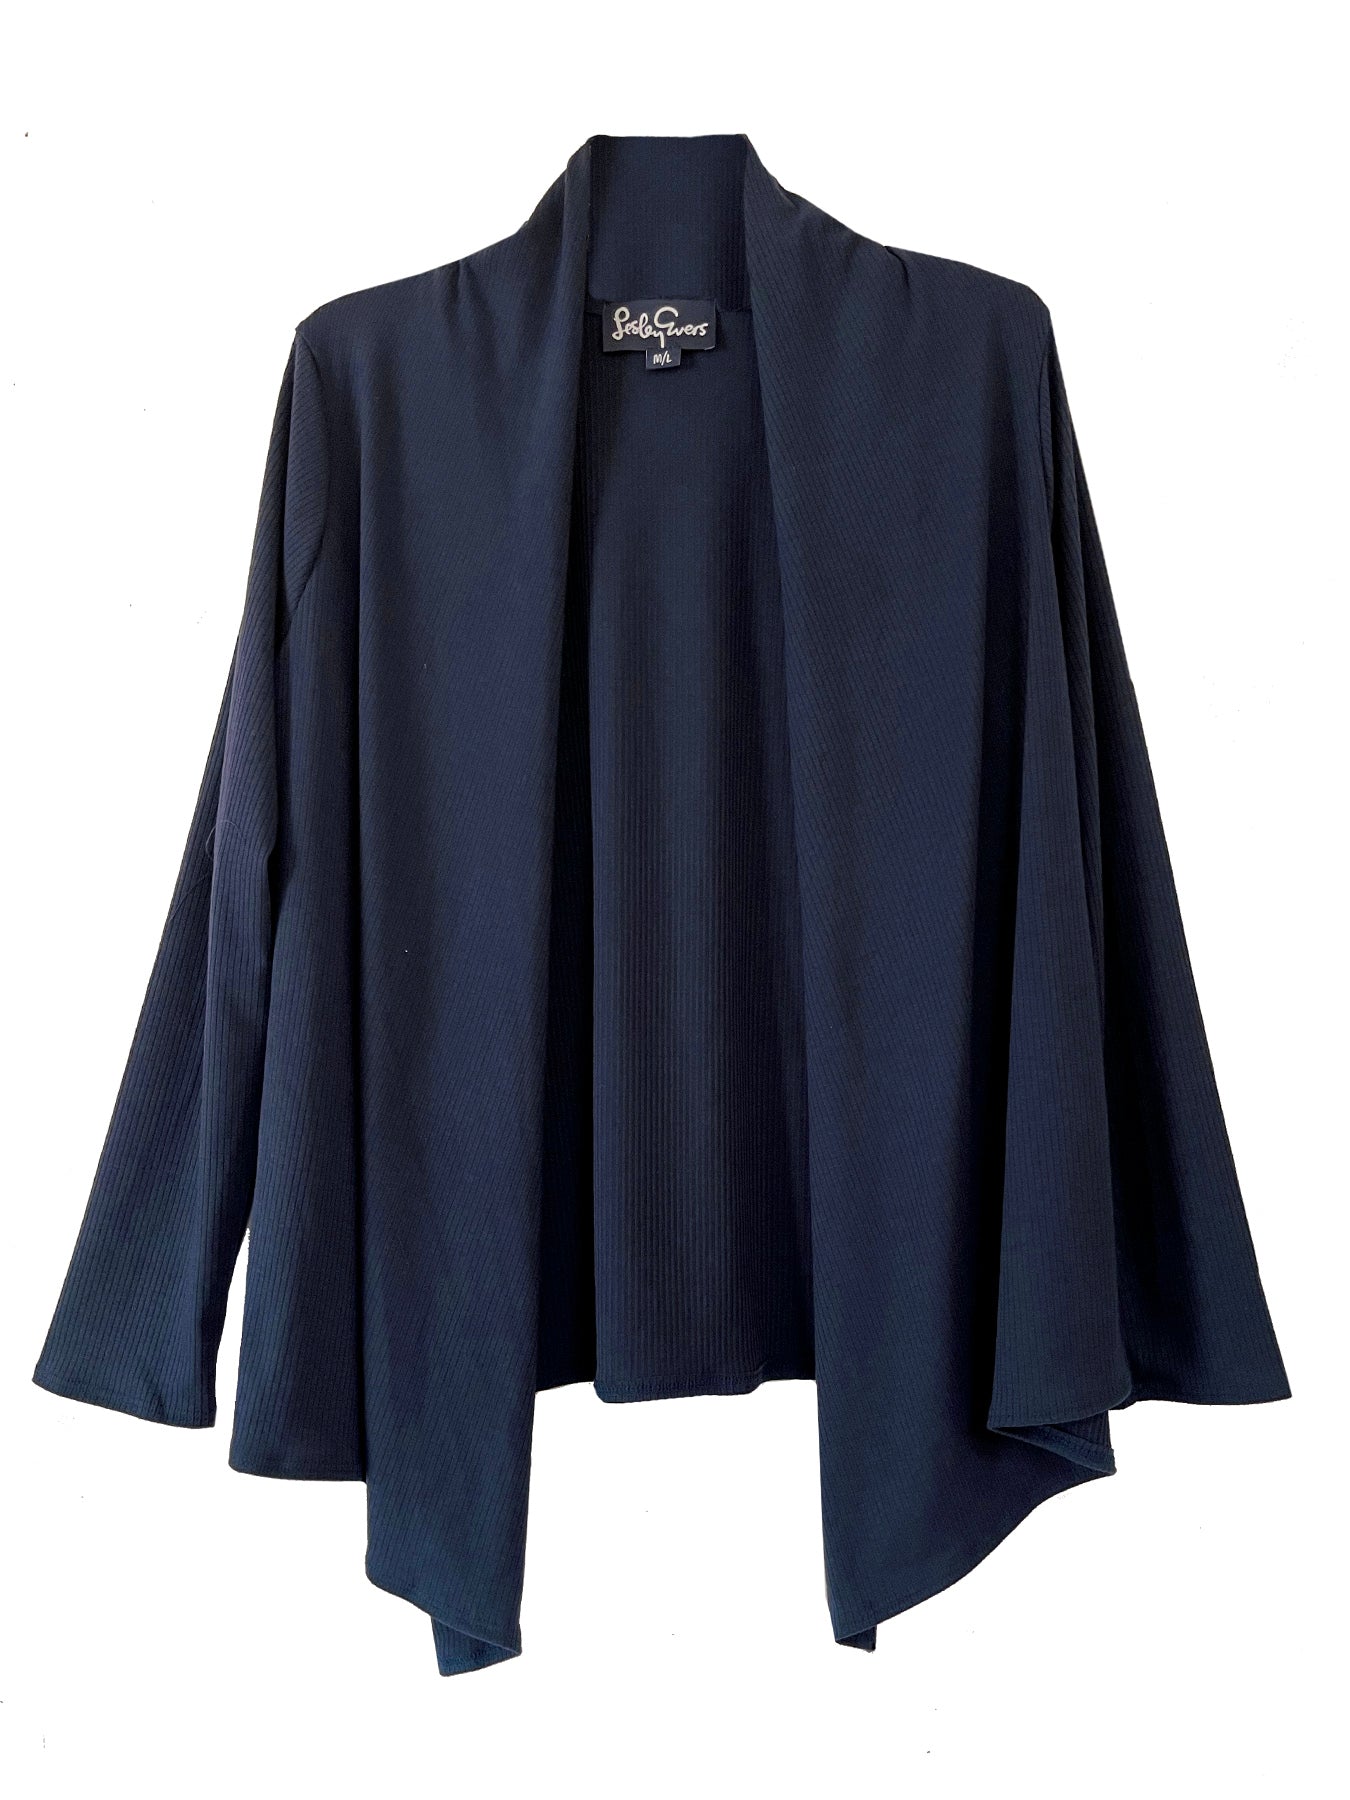 CARLY Navy Rib - Lesley Evers-Best Seller-Shop-Shop/All Products